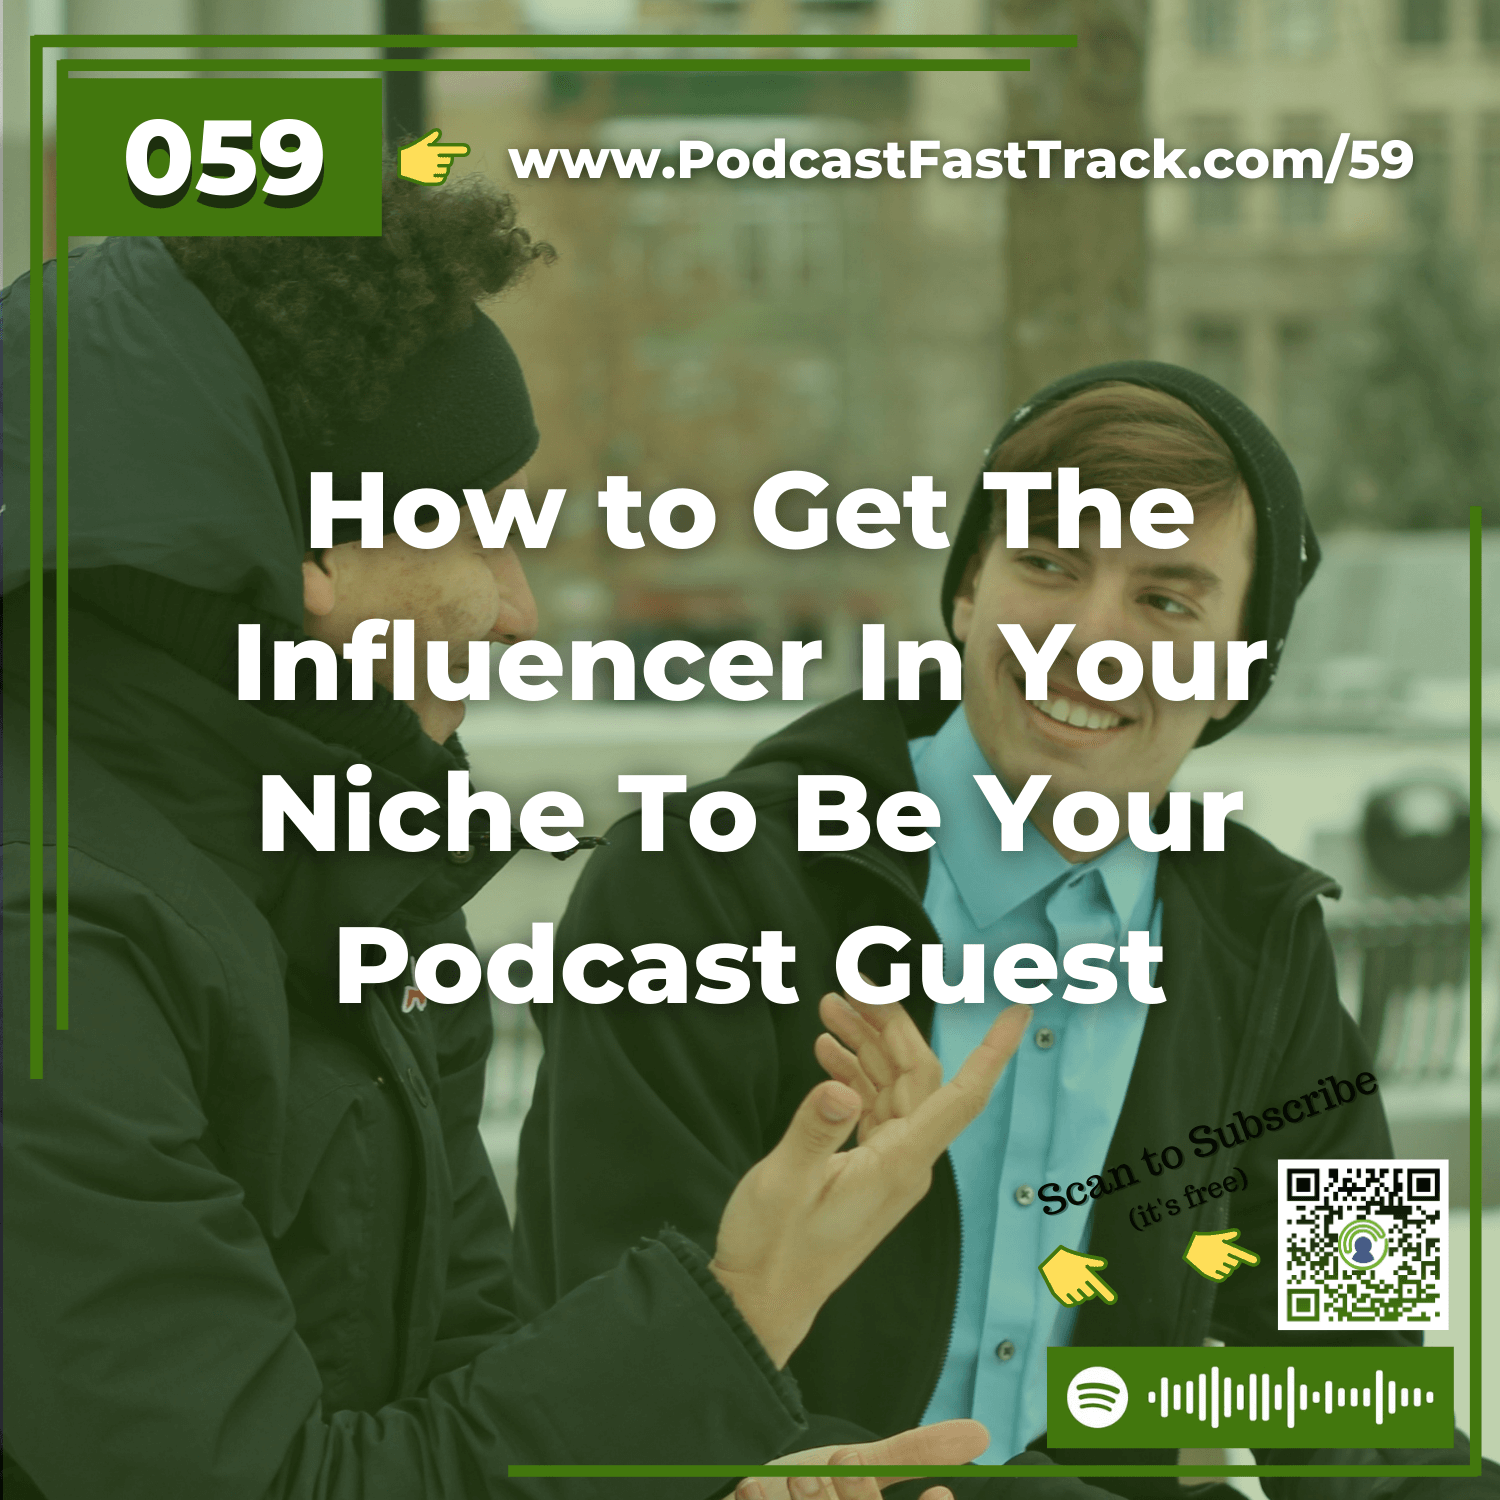 59: How to Get The Influencer In Your Niche To Be Your Podcast Guest